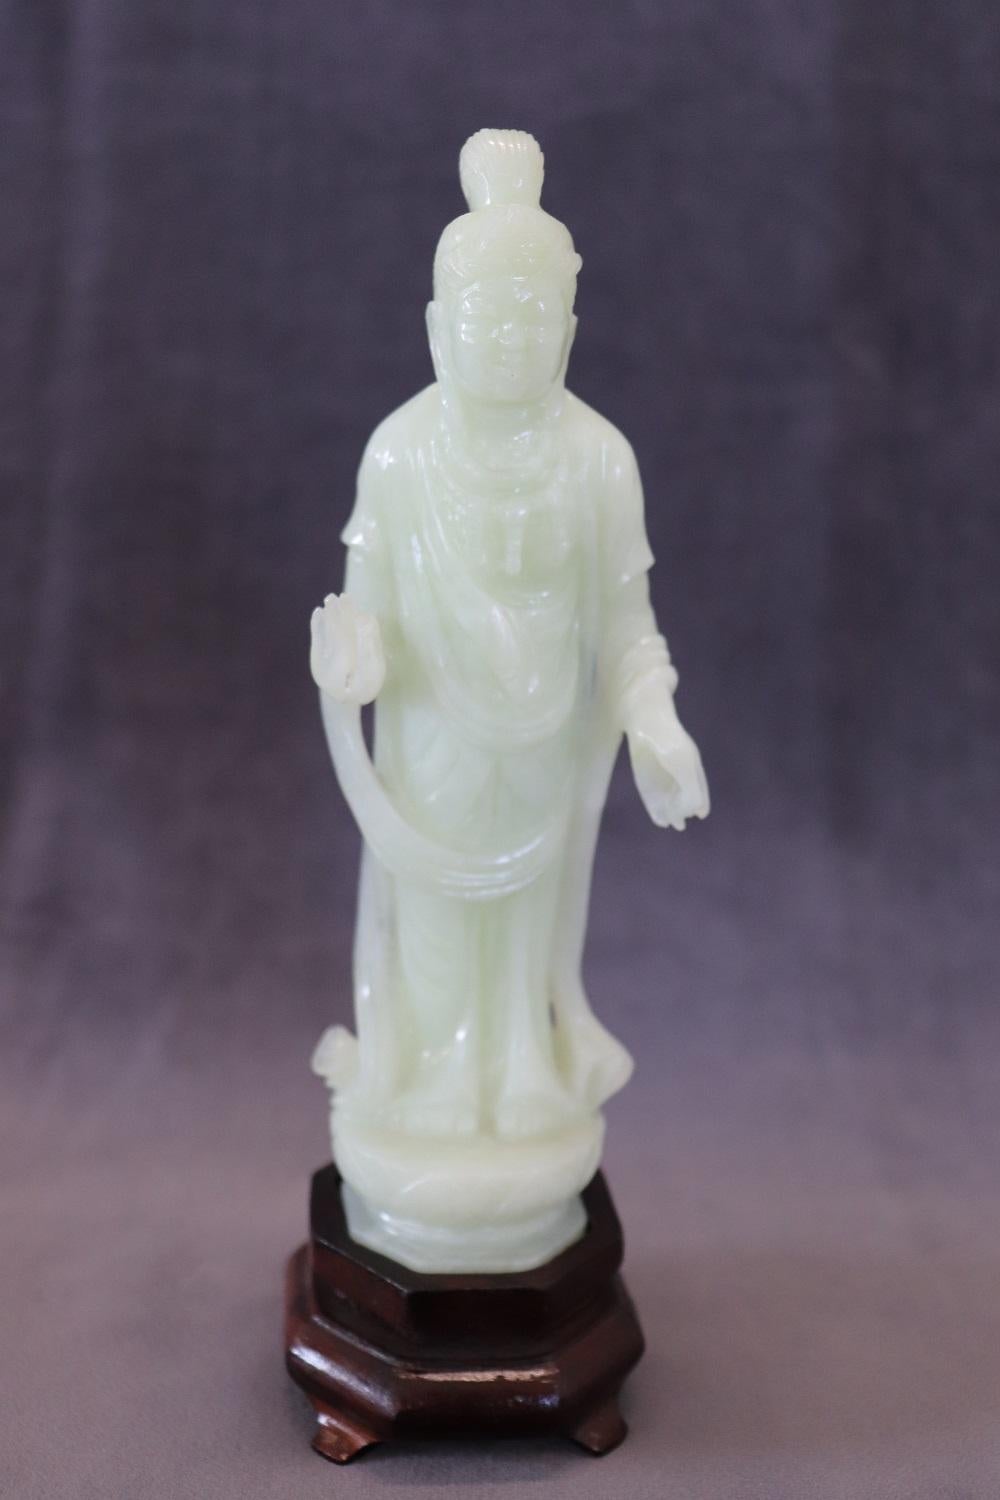 20th century beautiful sculpture in precious green jade made in china. fine figure of Standing Buddha. The sculpture rests on a wooden base. Perfect conditions.